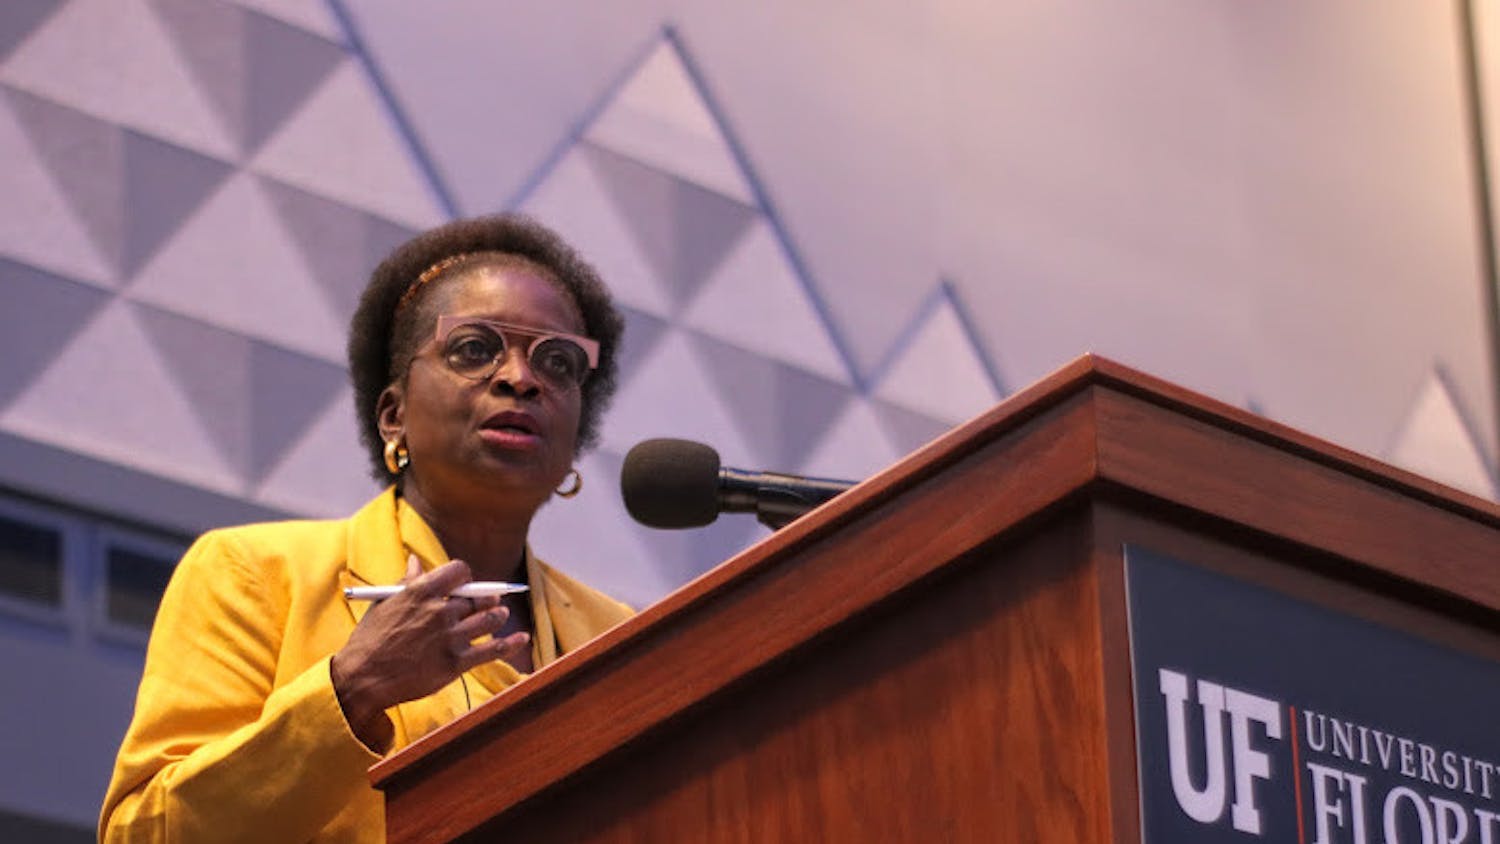 Former Federal Communications Commission Commissioner Mignon Clyburn gives a prepared speech at the event at the Reitz Union on Thursday, Sept. 9, 2021. She was introduced by Mark Jamison, the Public Utility Research Center director and Gerald Gunter professor, as well as David Reed, the Strategic Initiatives associate provost.